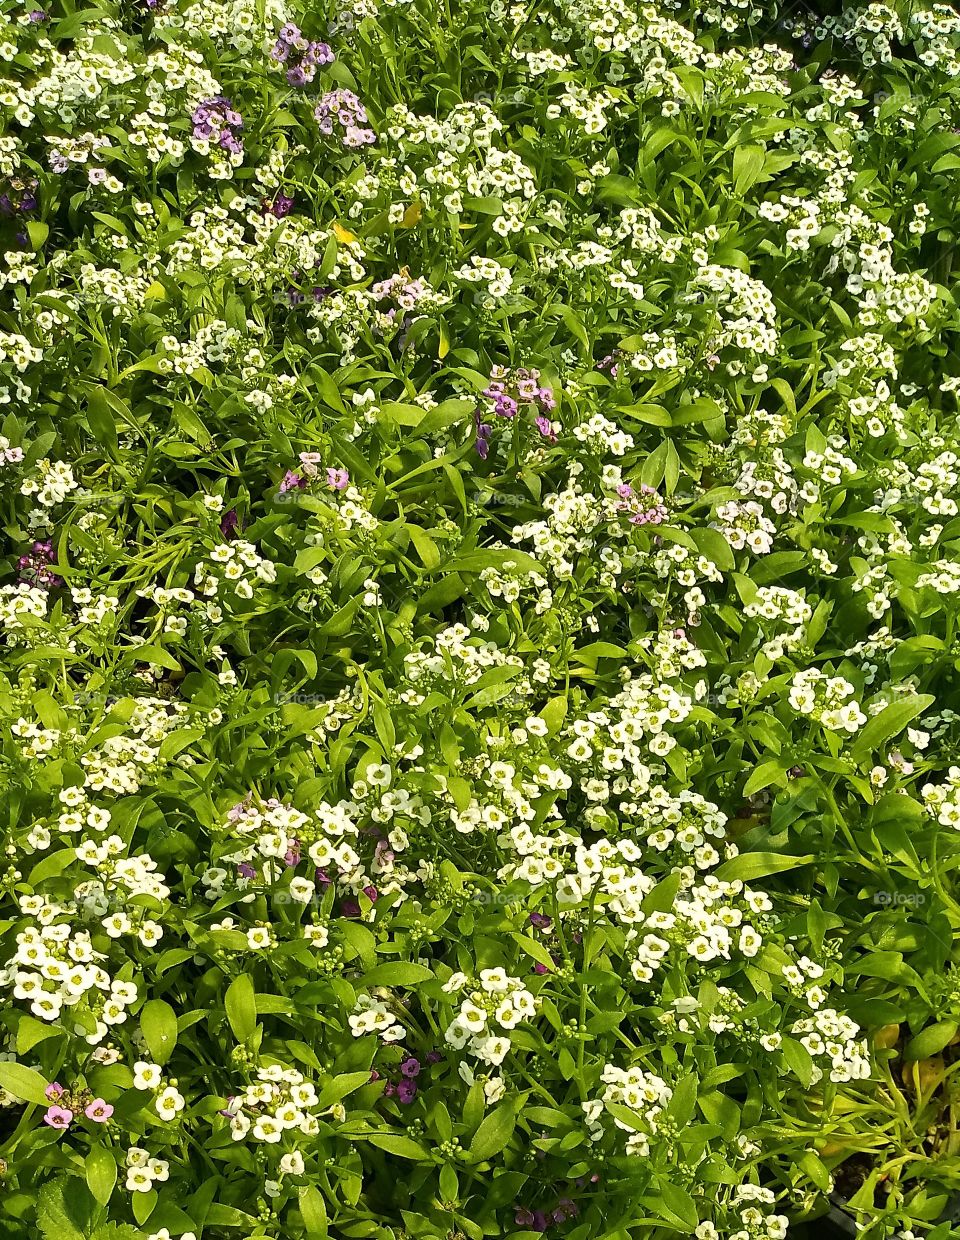 a patch of small four petaled white flowers